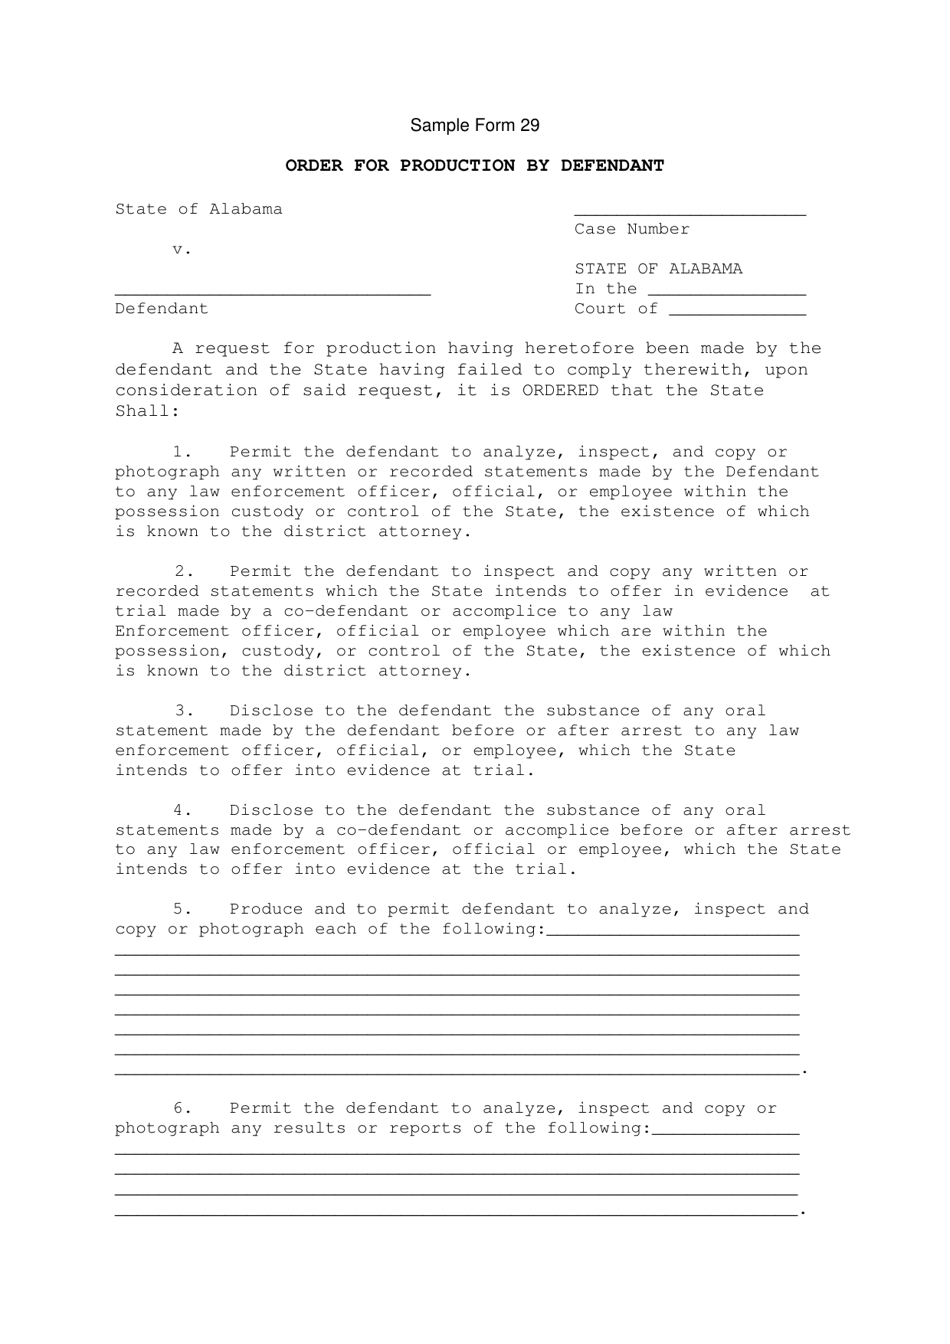 Sample Form 29 Order for Production by Defendant - Alabama, Page 1